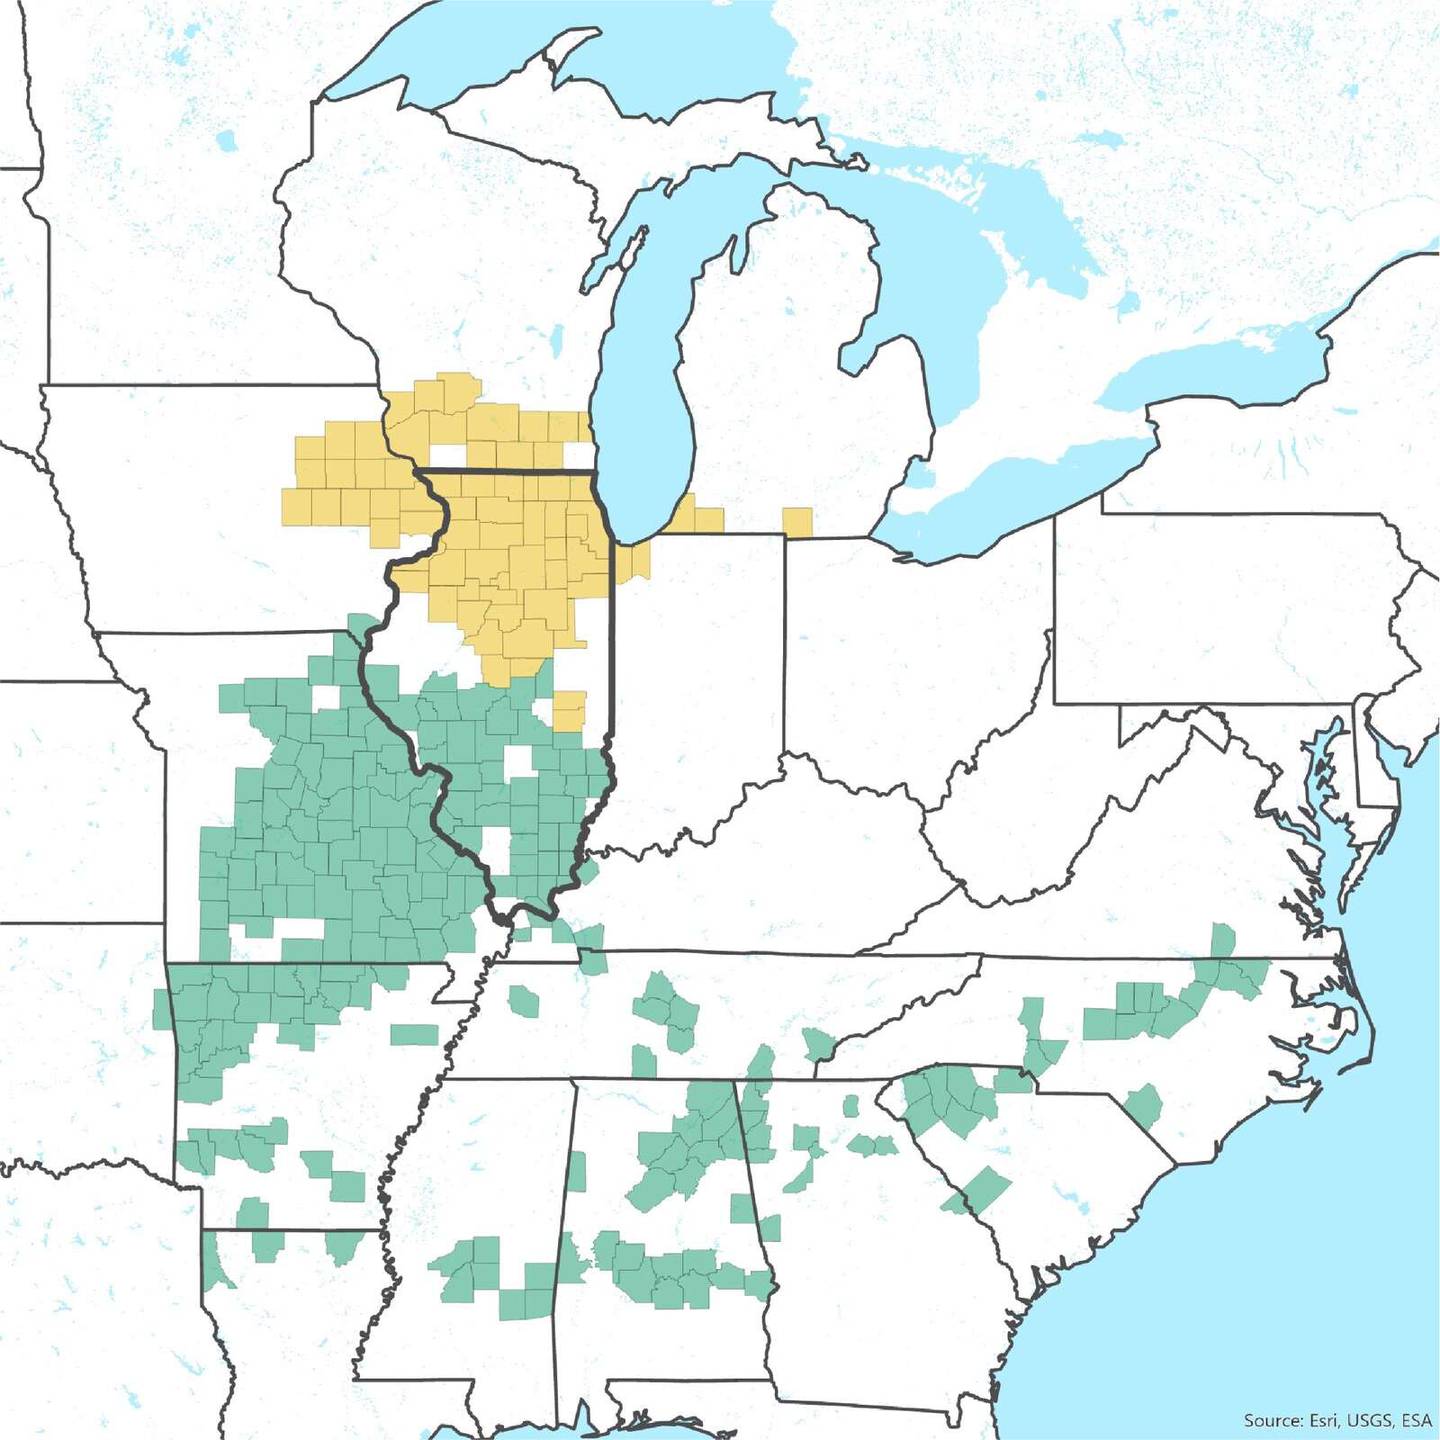 This map shows the ranges of Broods XIII and XIX. Brood XIII is shown in yellow and Brood XIX is shown in teal. Courtesy of Lake County Forest Preserves, Esri, USGS and ESA.